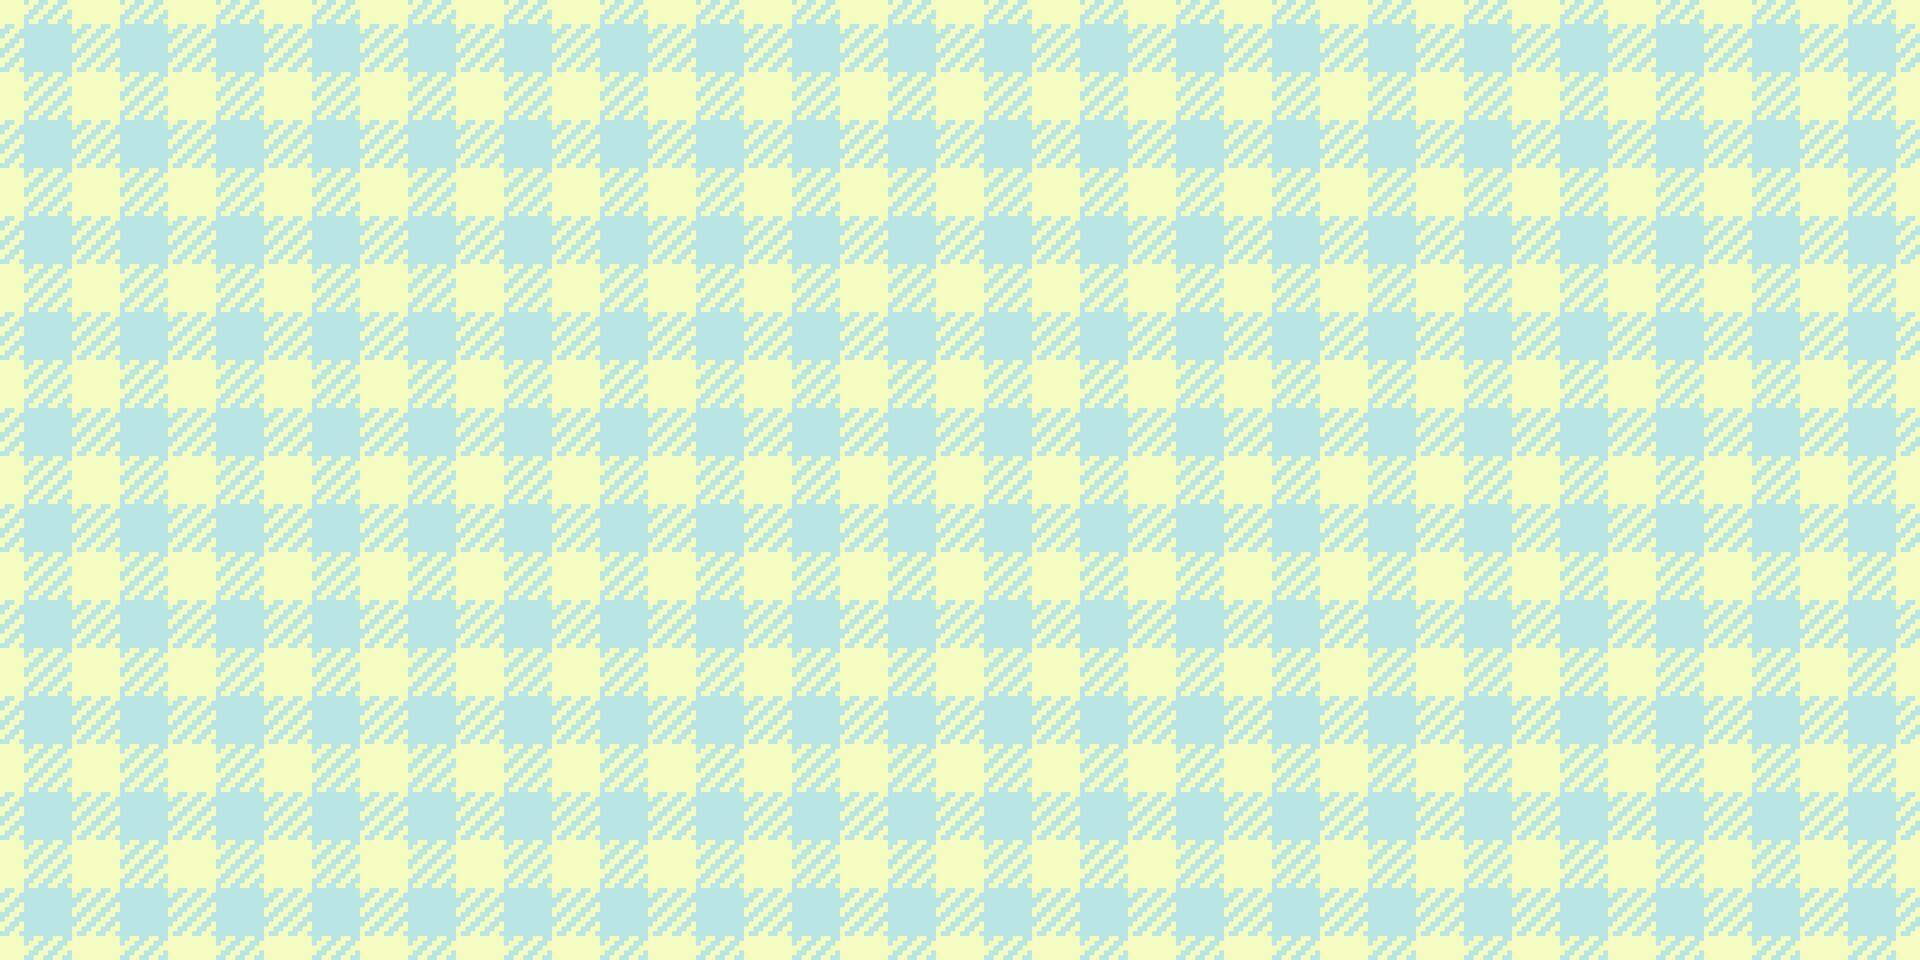 Collage plaid textile background, rag pattern tartan seamless. Thanksgiving texture check fabric in light color. vector